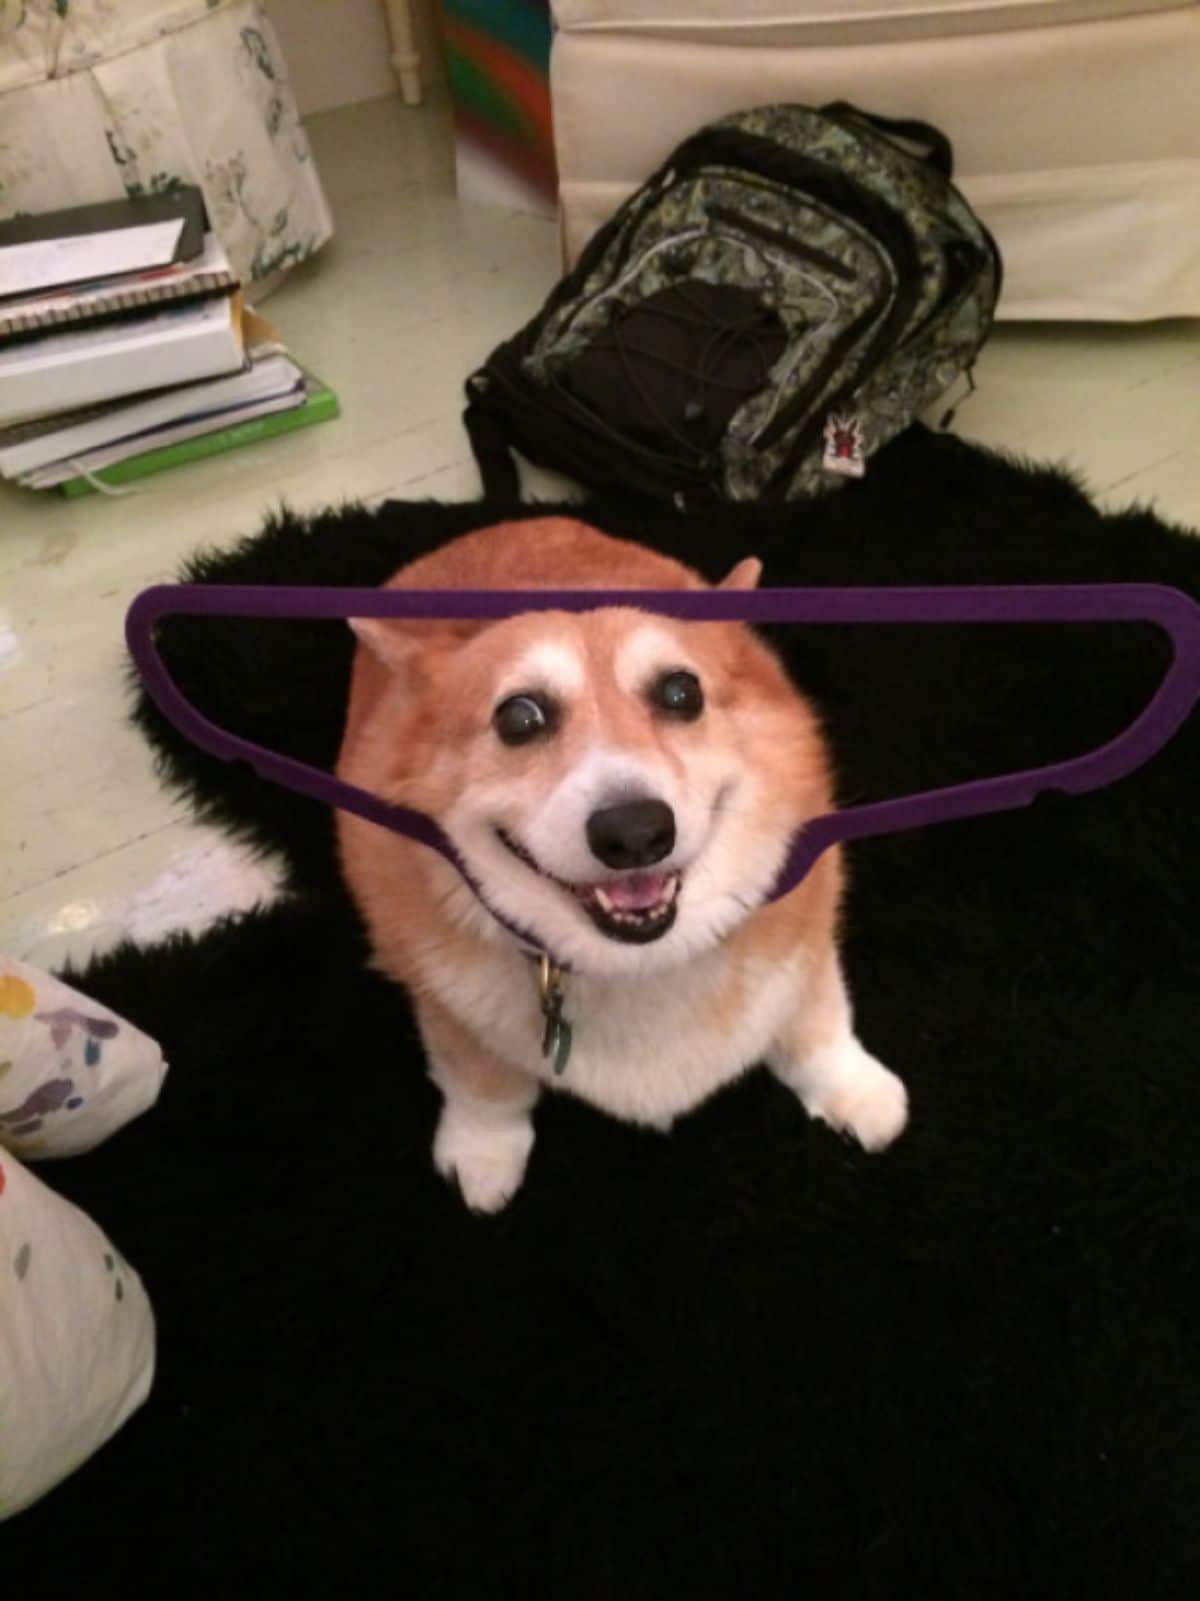 brown and white corgi on a black rug with the head stuck inside a purple clothes hanger